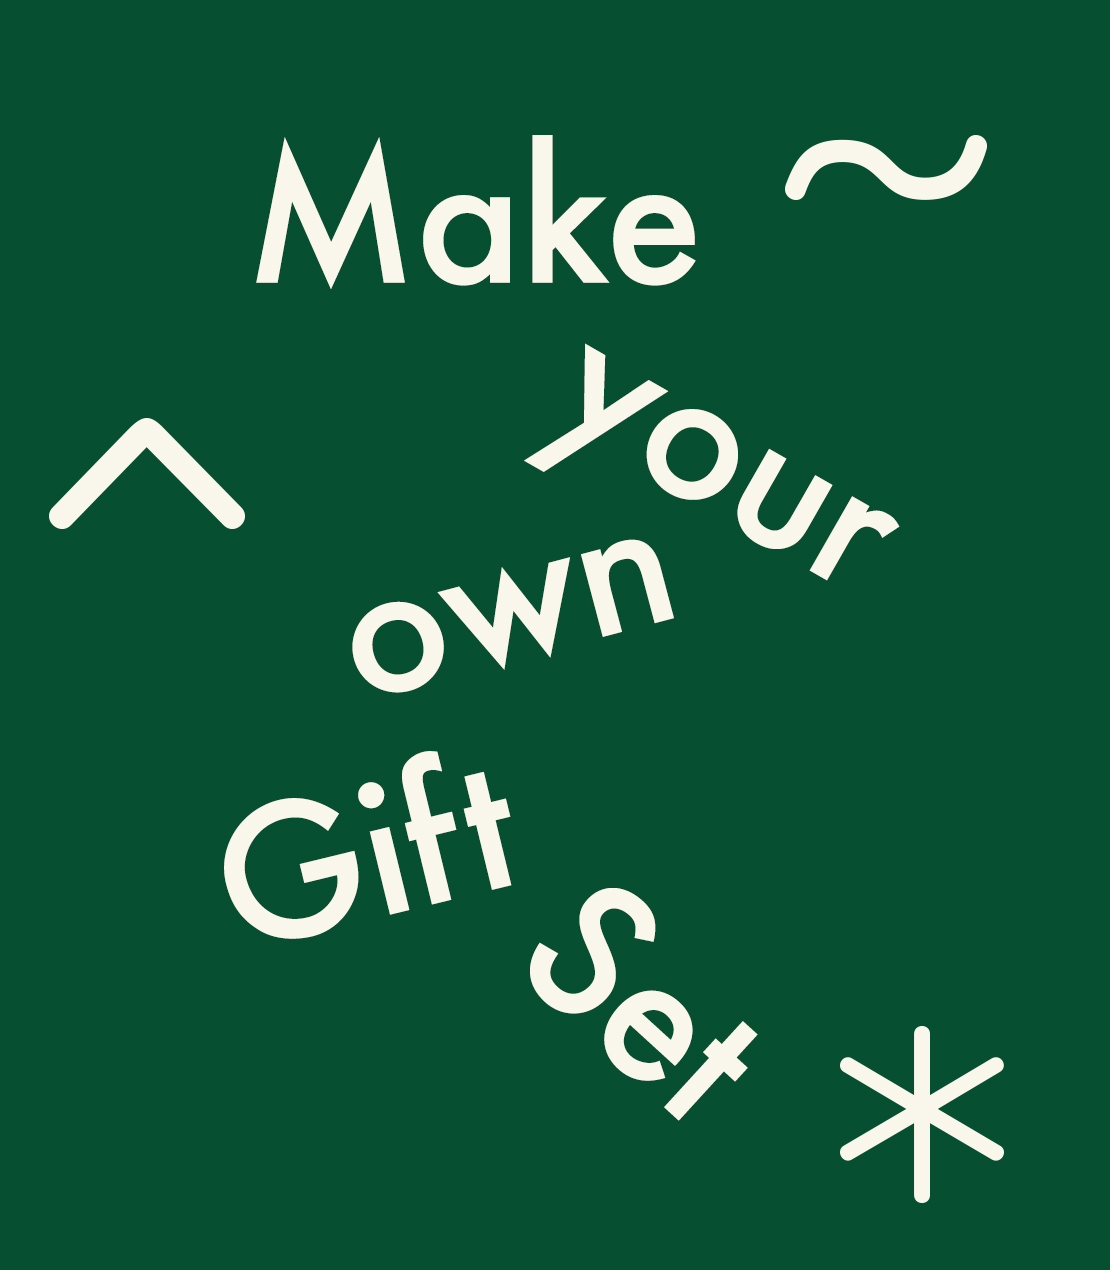 make your own gift set